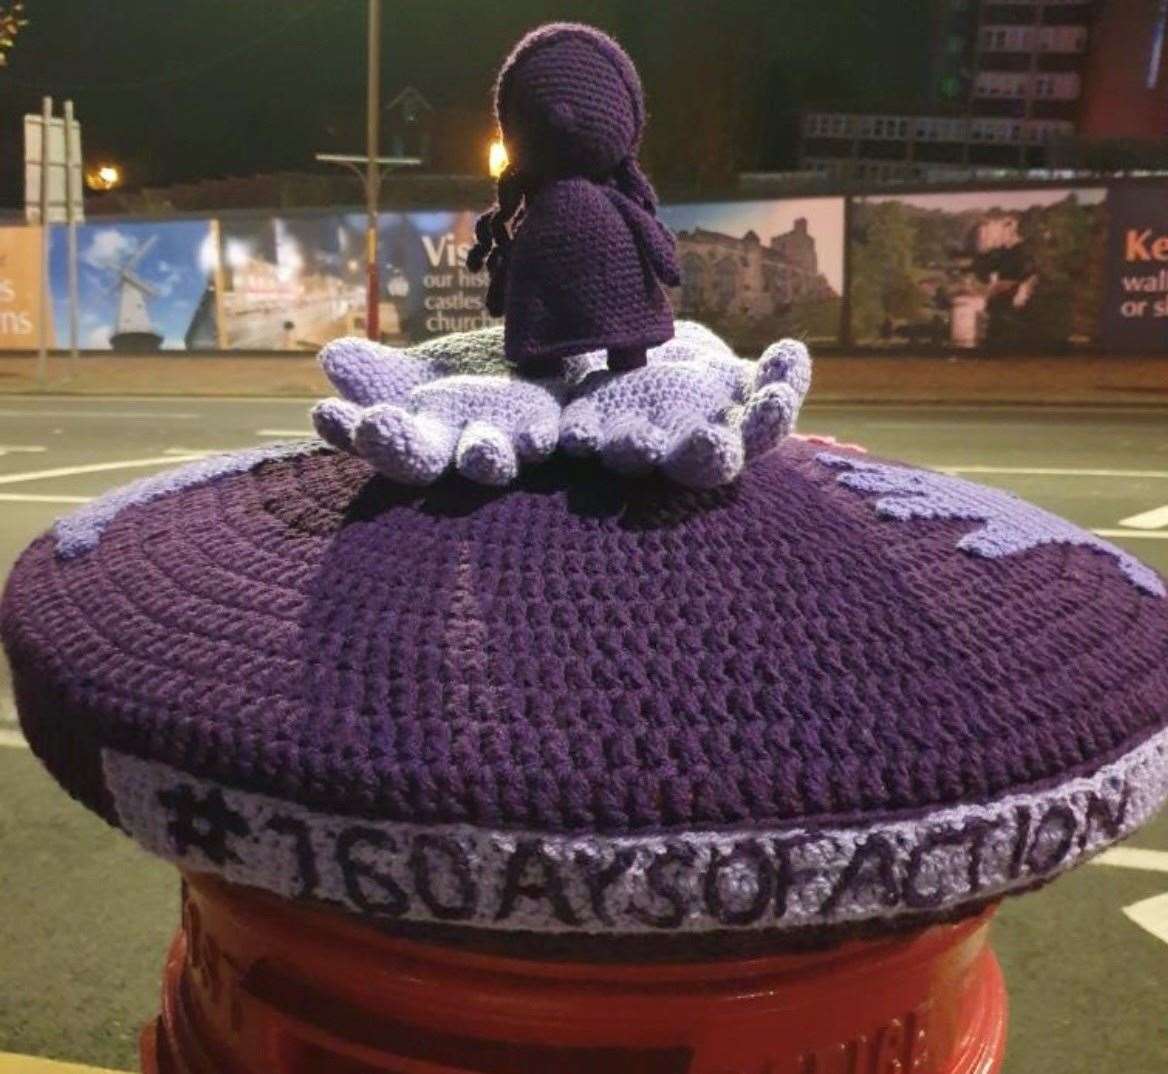 A new knitted design has been spotted on top of a postbox in Mount Pleasant Road. Picture: DAVSS/tunbridgewellsyarnbomber